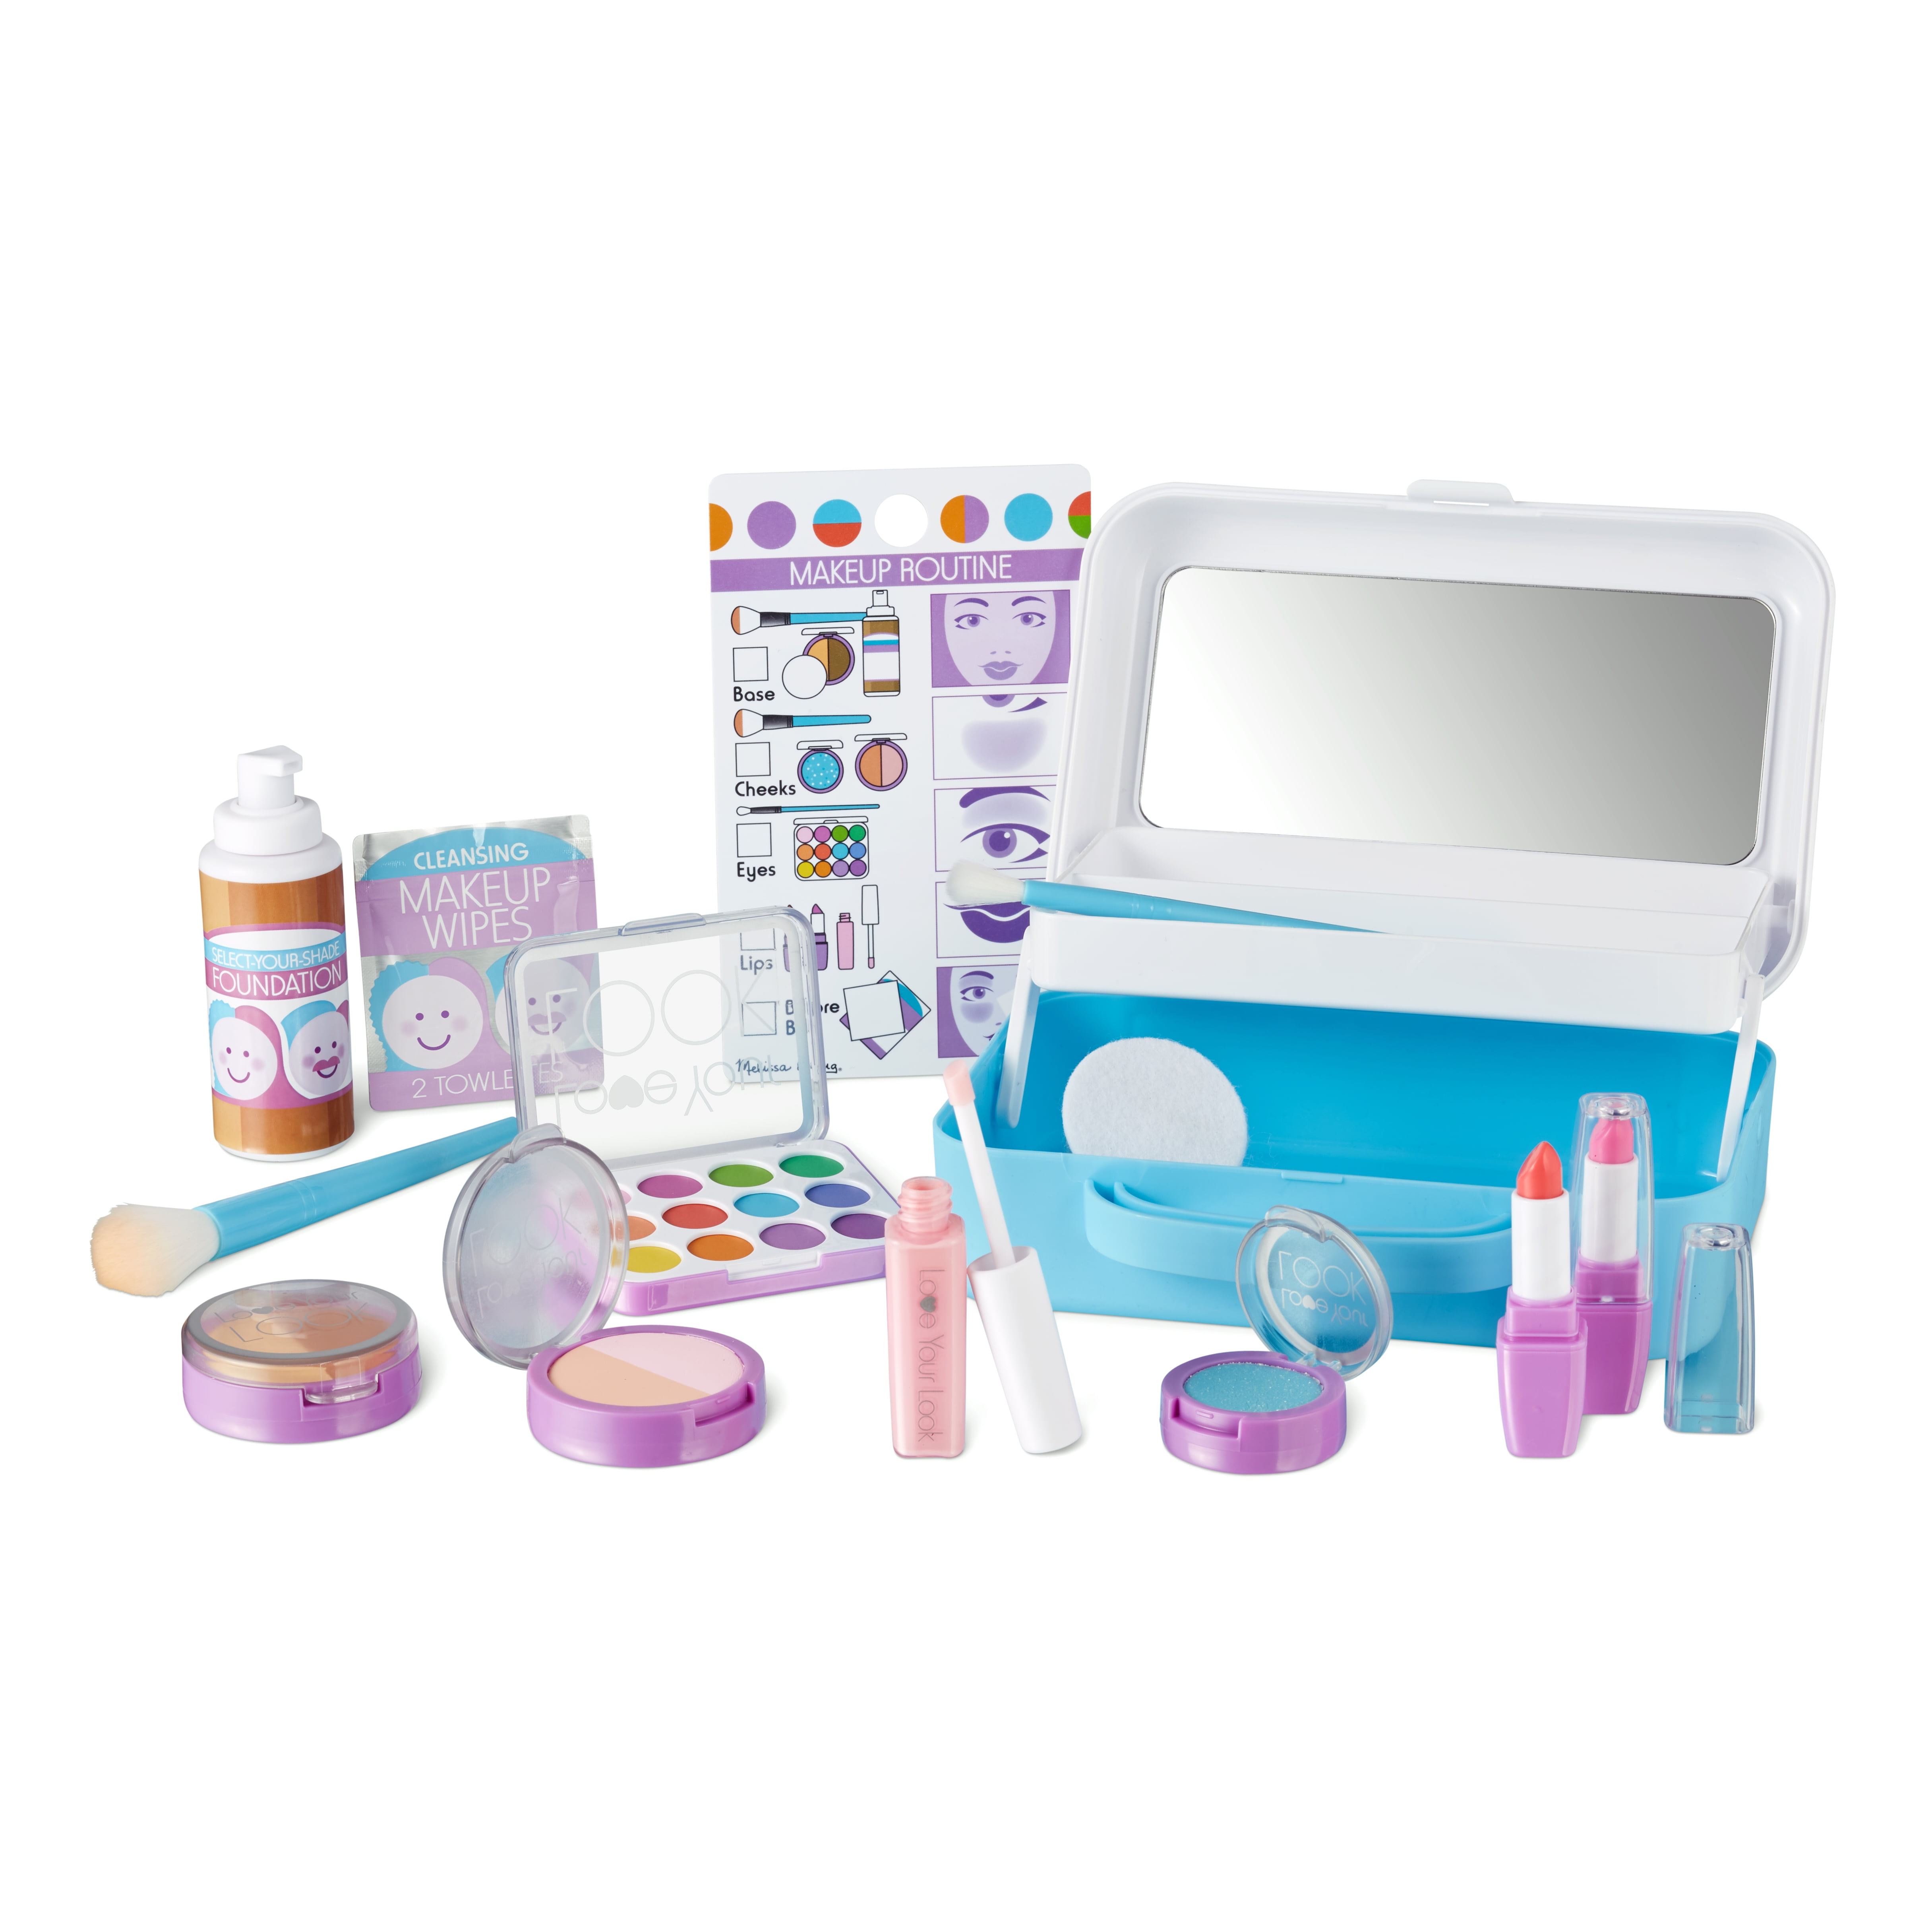 Melissa & Doug Love Your Look Pretend Makeup Kit Play Set  16 Pieces for Mess-Free Pretend Makeup Play (DOES NOT CONTAIN REAL COSMETICS)